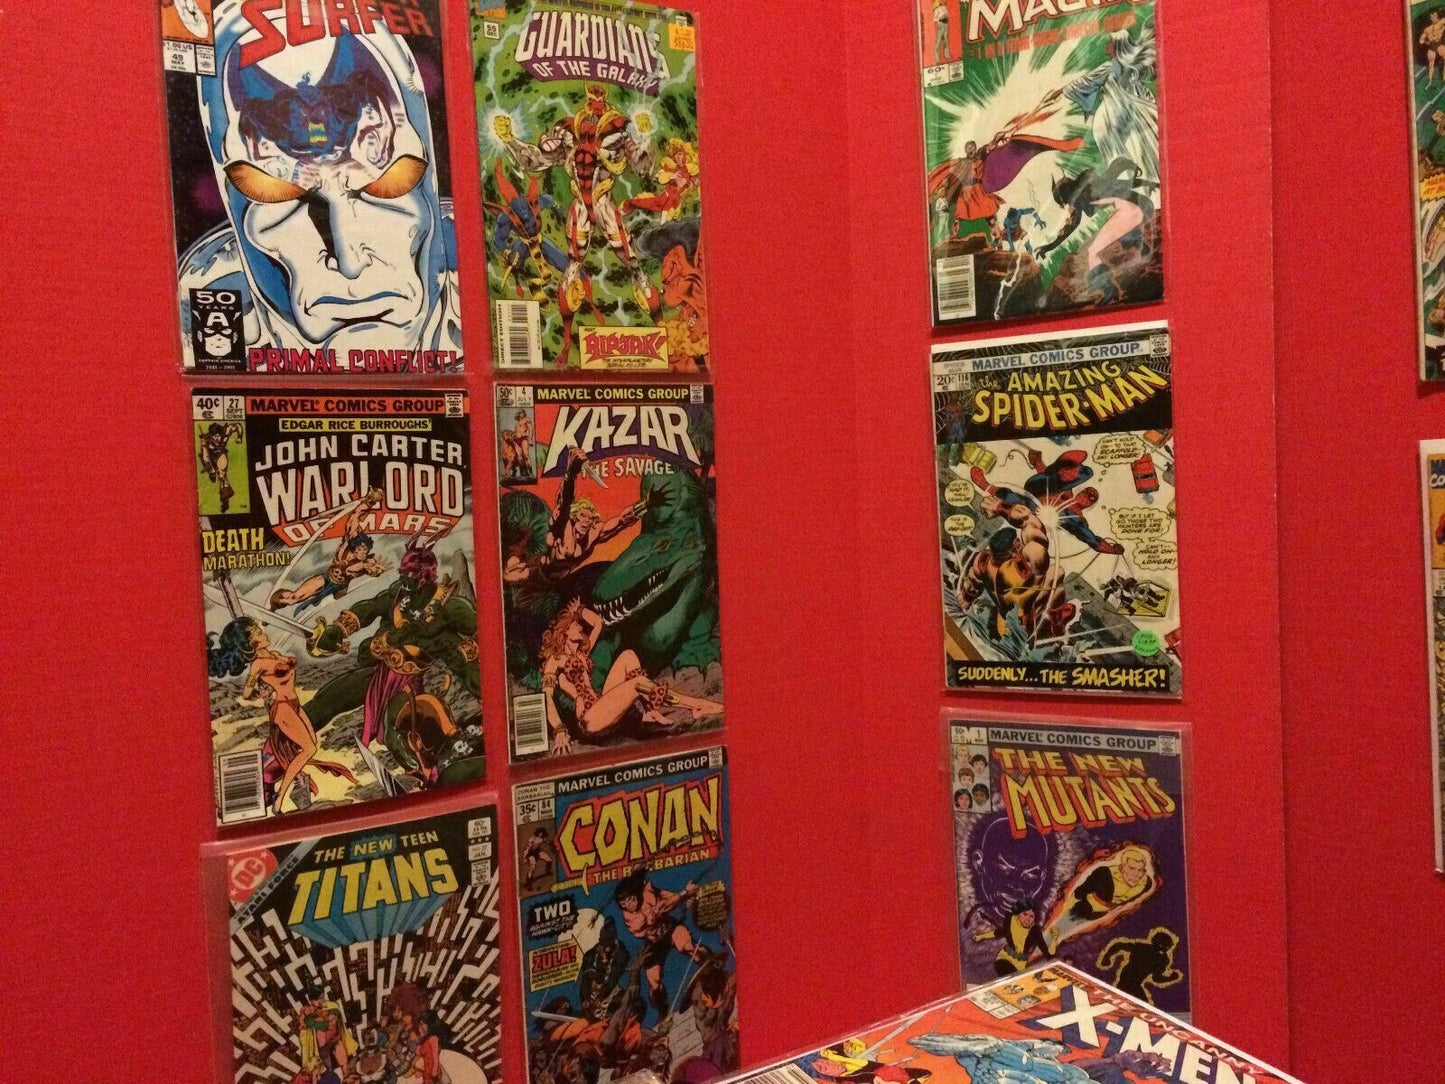 Prime 10 Comics Book Lot-Marvel And Dc Only Free Ship! Vf+ To Nm+ No Duplicates